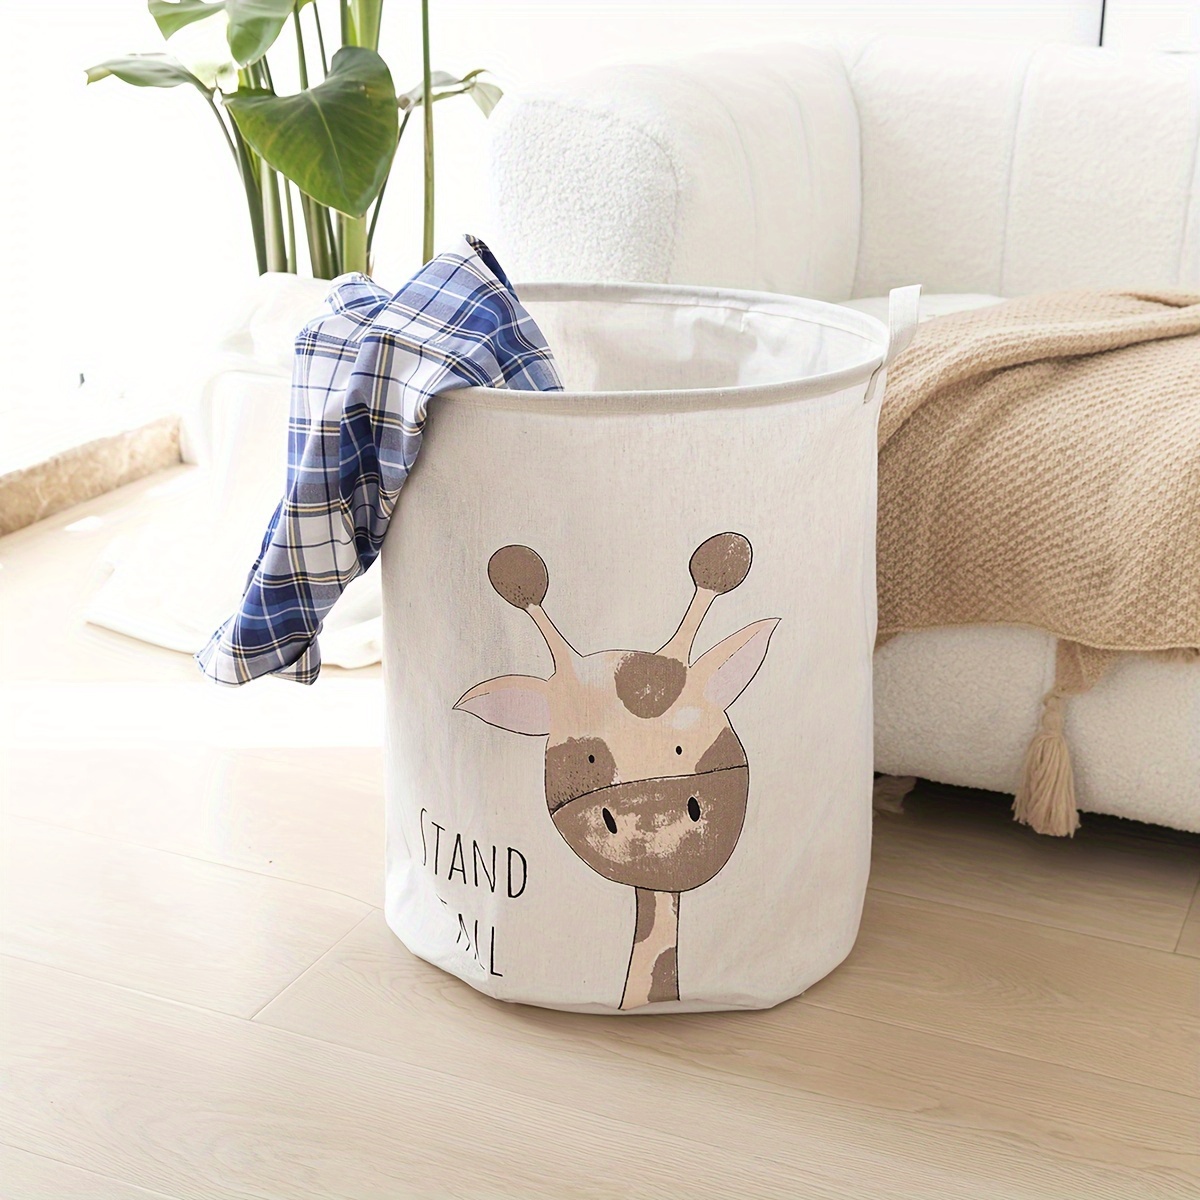 

Casual Style Fabric Laundry Hamper With Giraffe Design And Handles, Collapsible Round Storage Basket For Clothes, Toys, And Books - Suitable For Various Room Types, Ideal For Ages 12-14